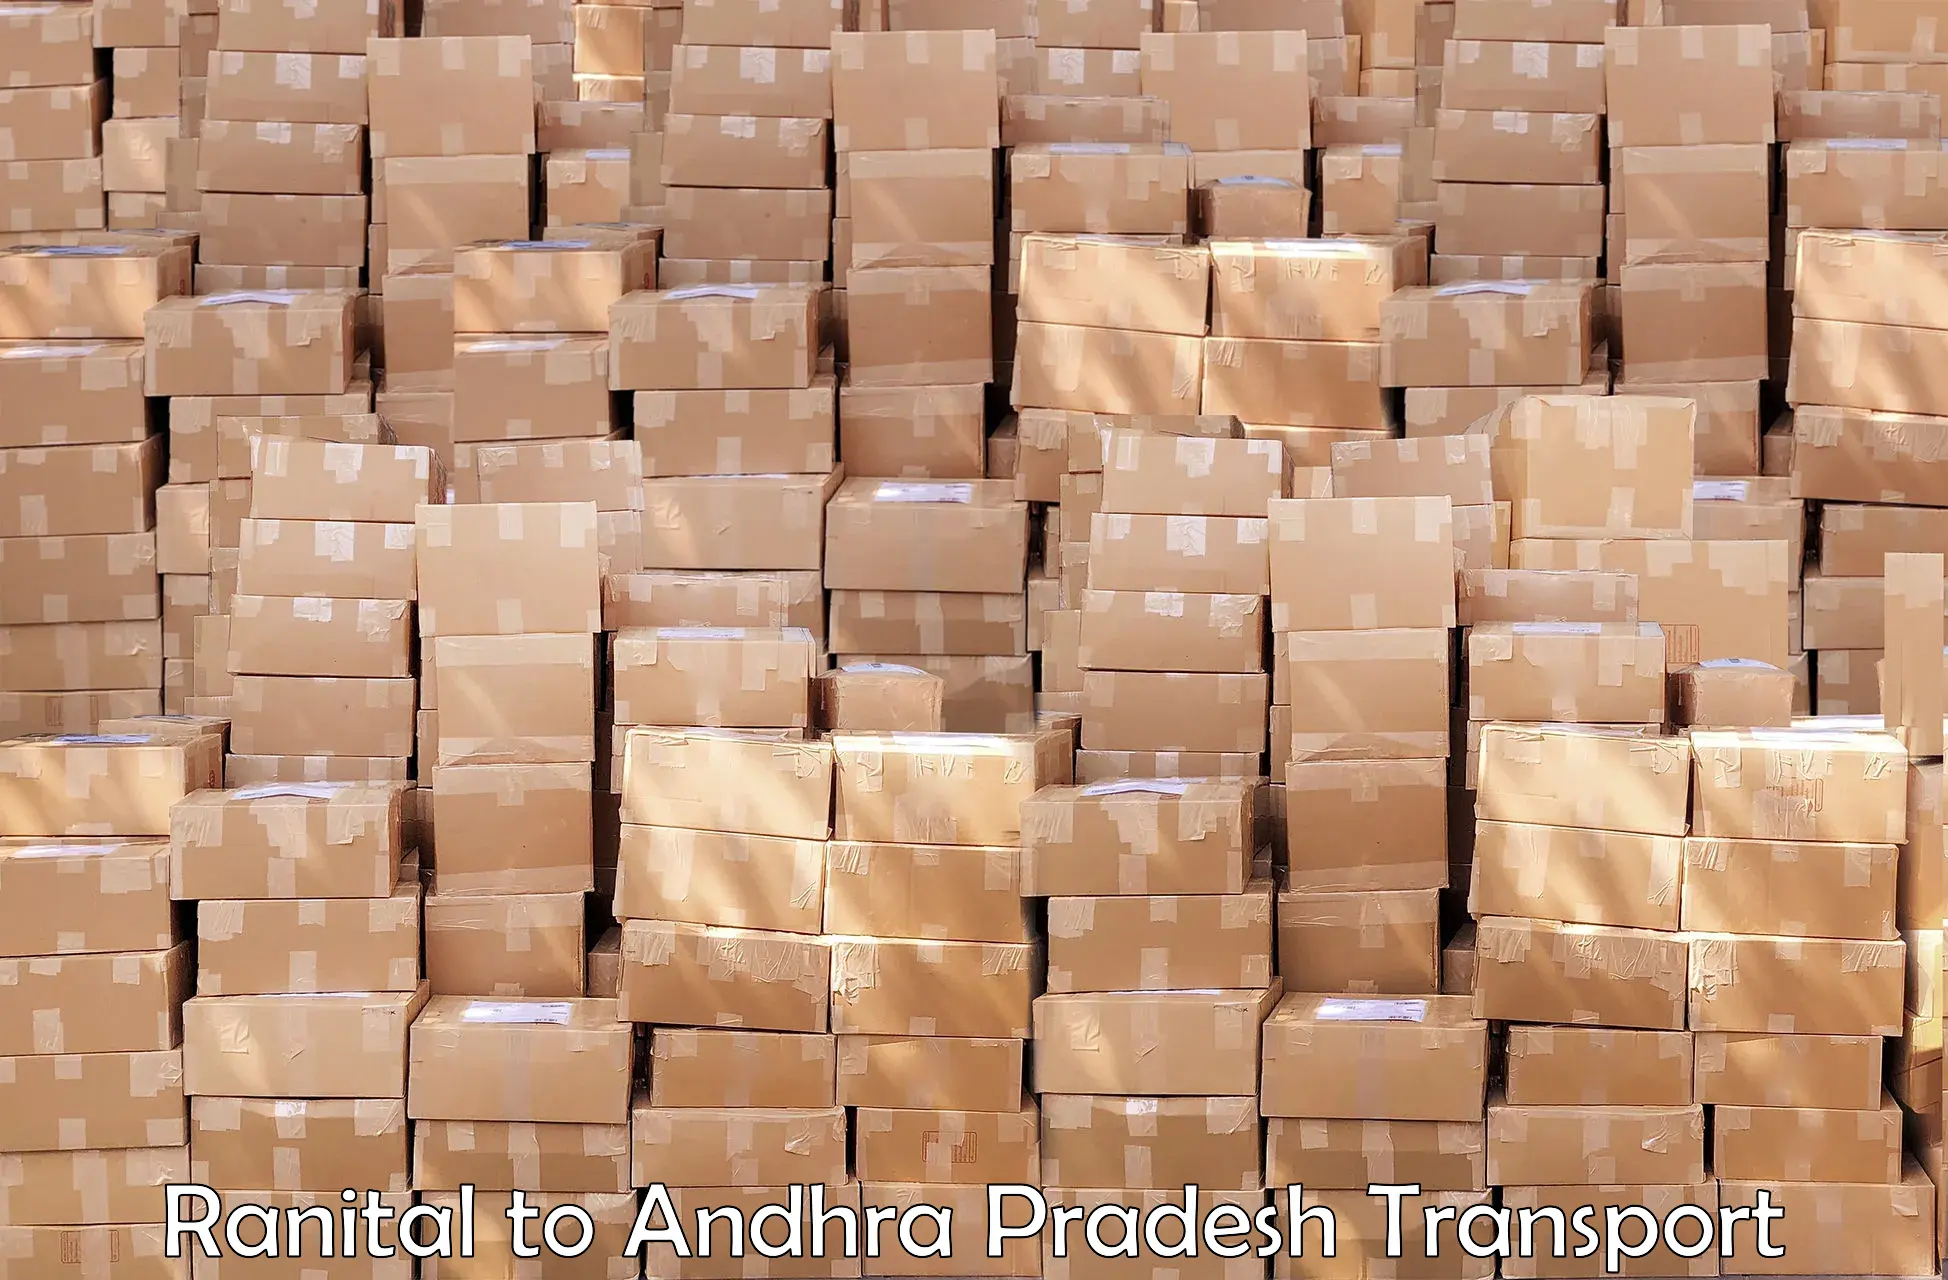 Truck transport companies in India Ranital to Pathapatnam